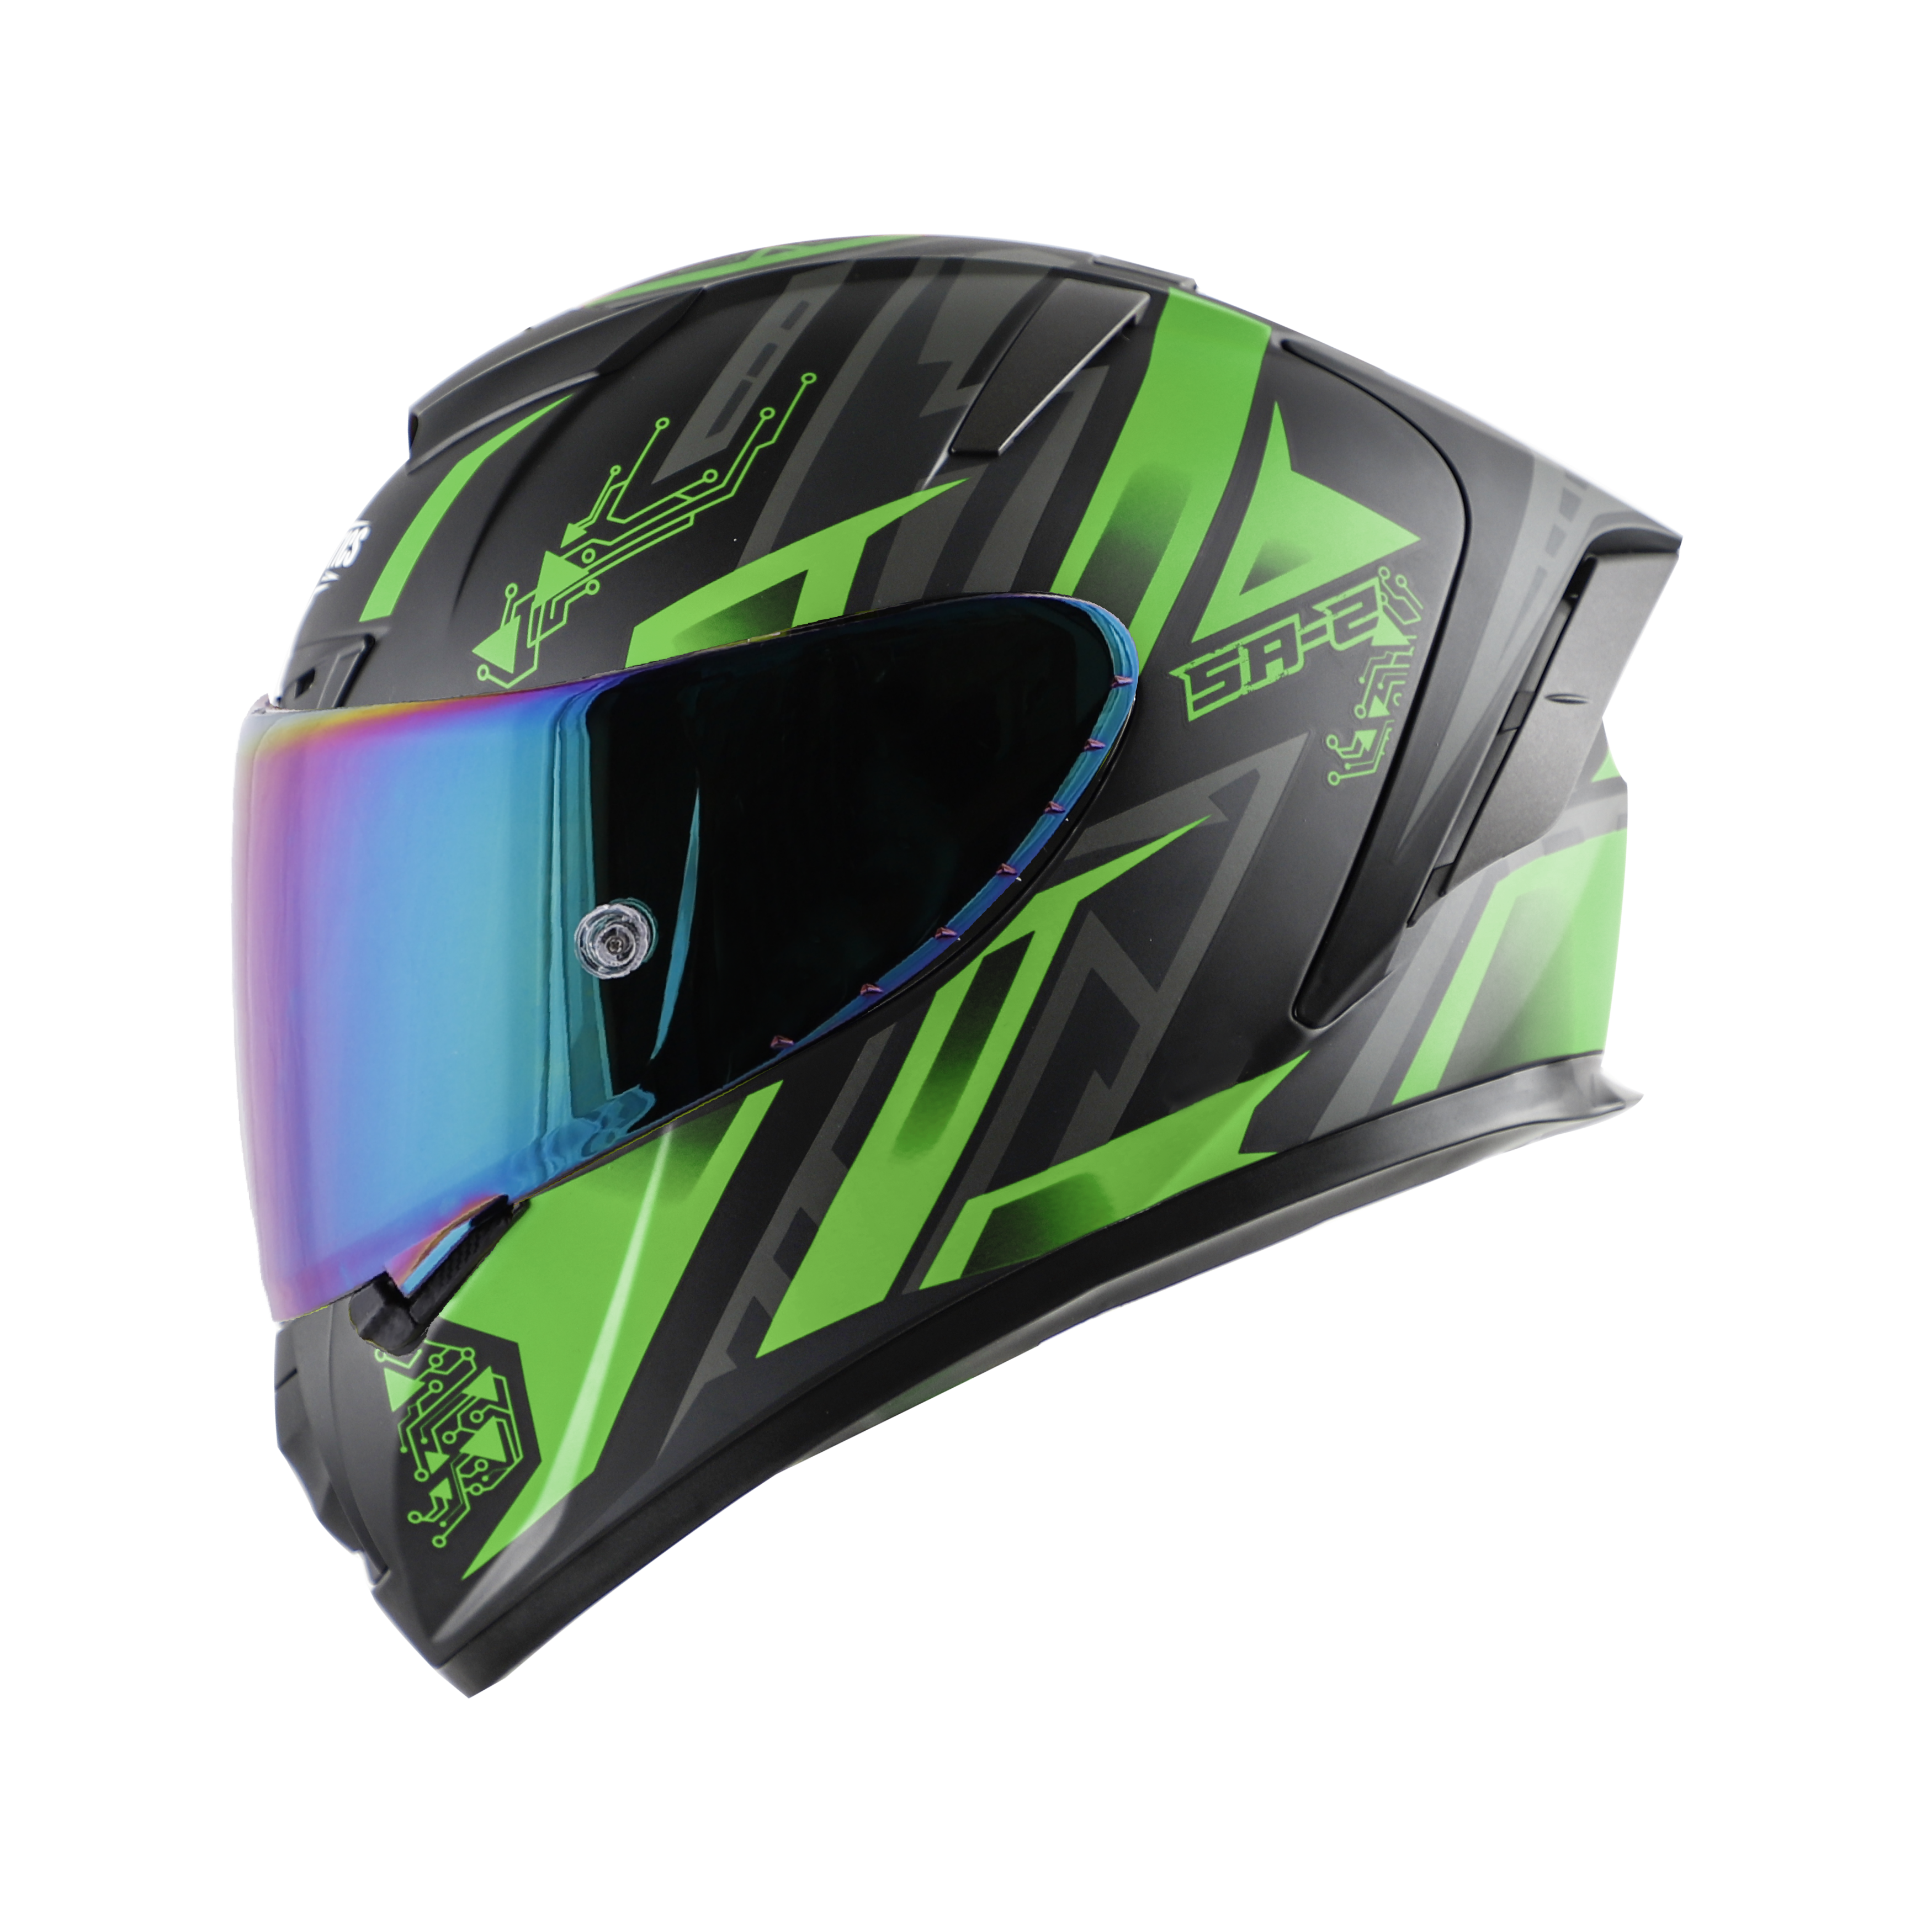 SA-2 ELECTRIC GLOSSY BLACK WITH GREEN (FITTED WITH CLEAR VISOR EXTRA RAINBOW CHROME VISOR FREE WITH ANTI-FOG SHIELD HOLDER)